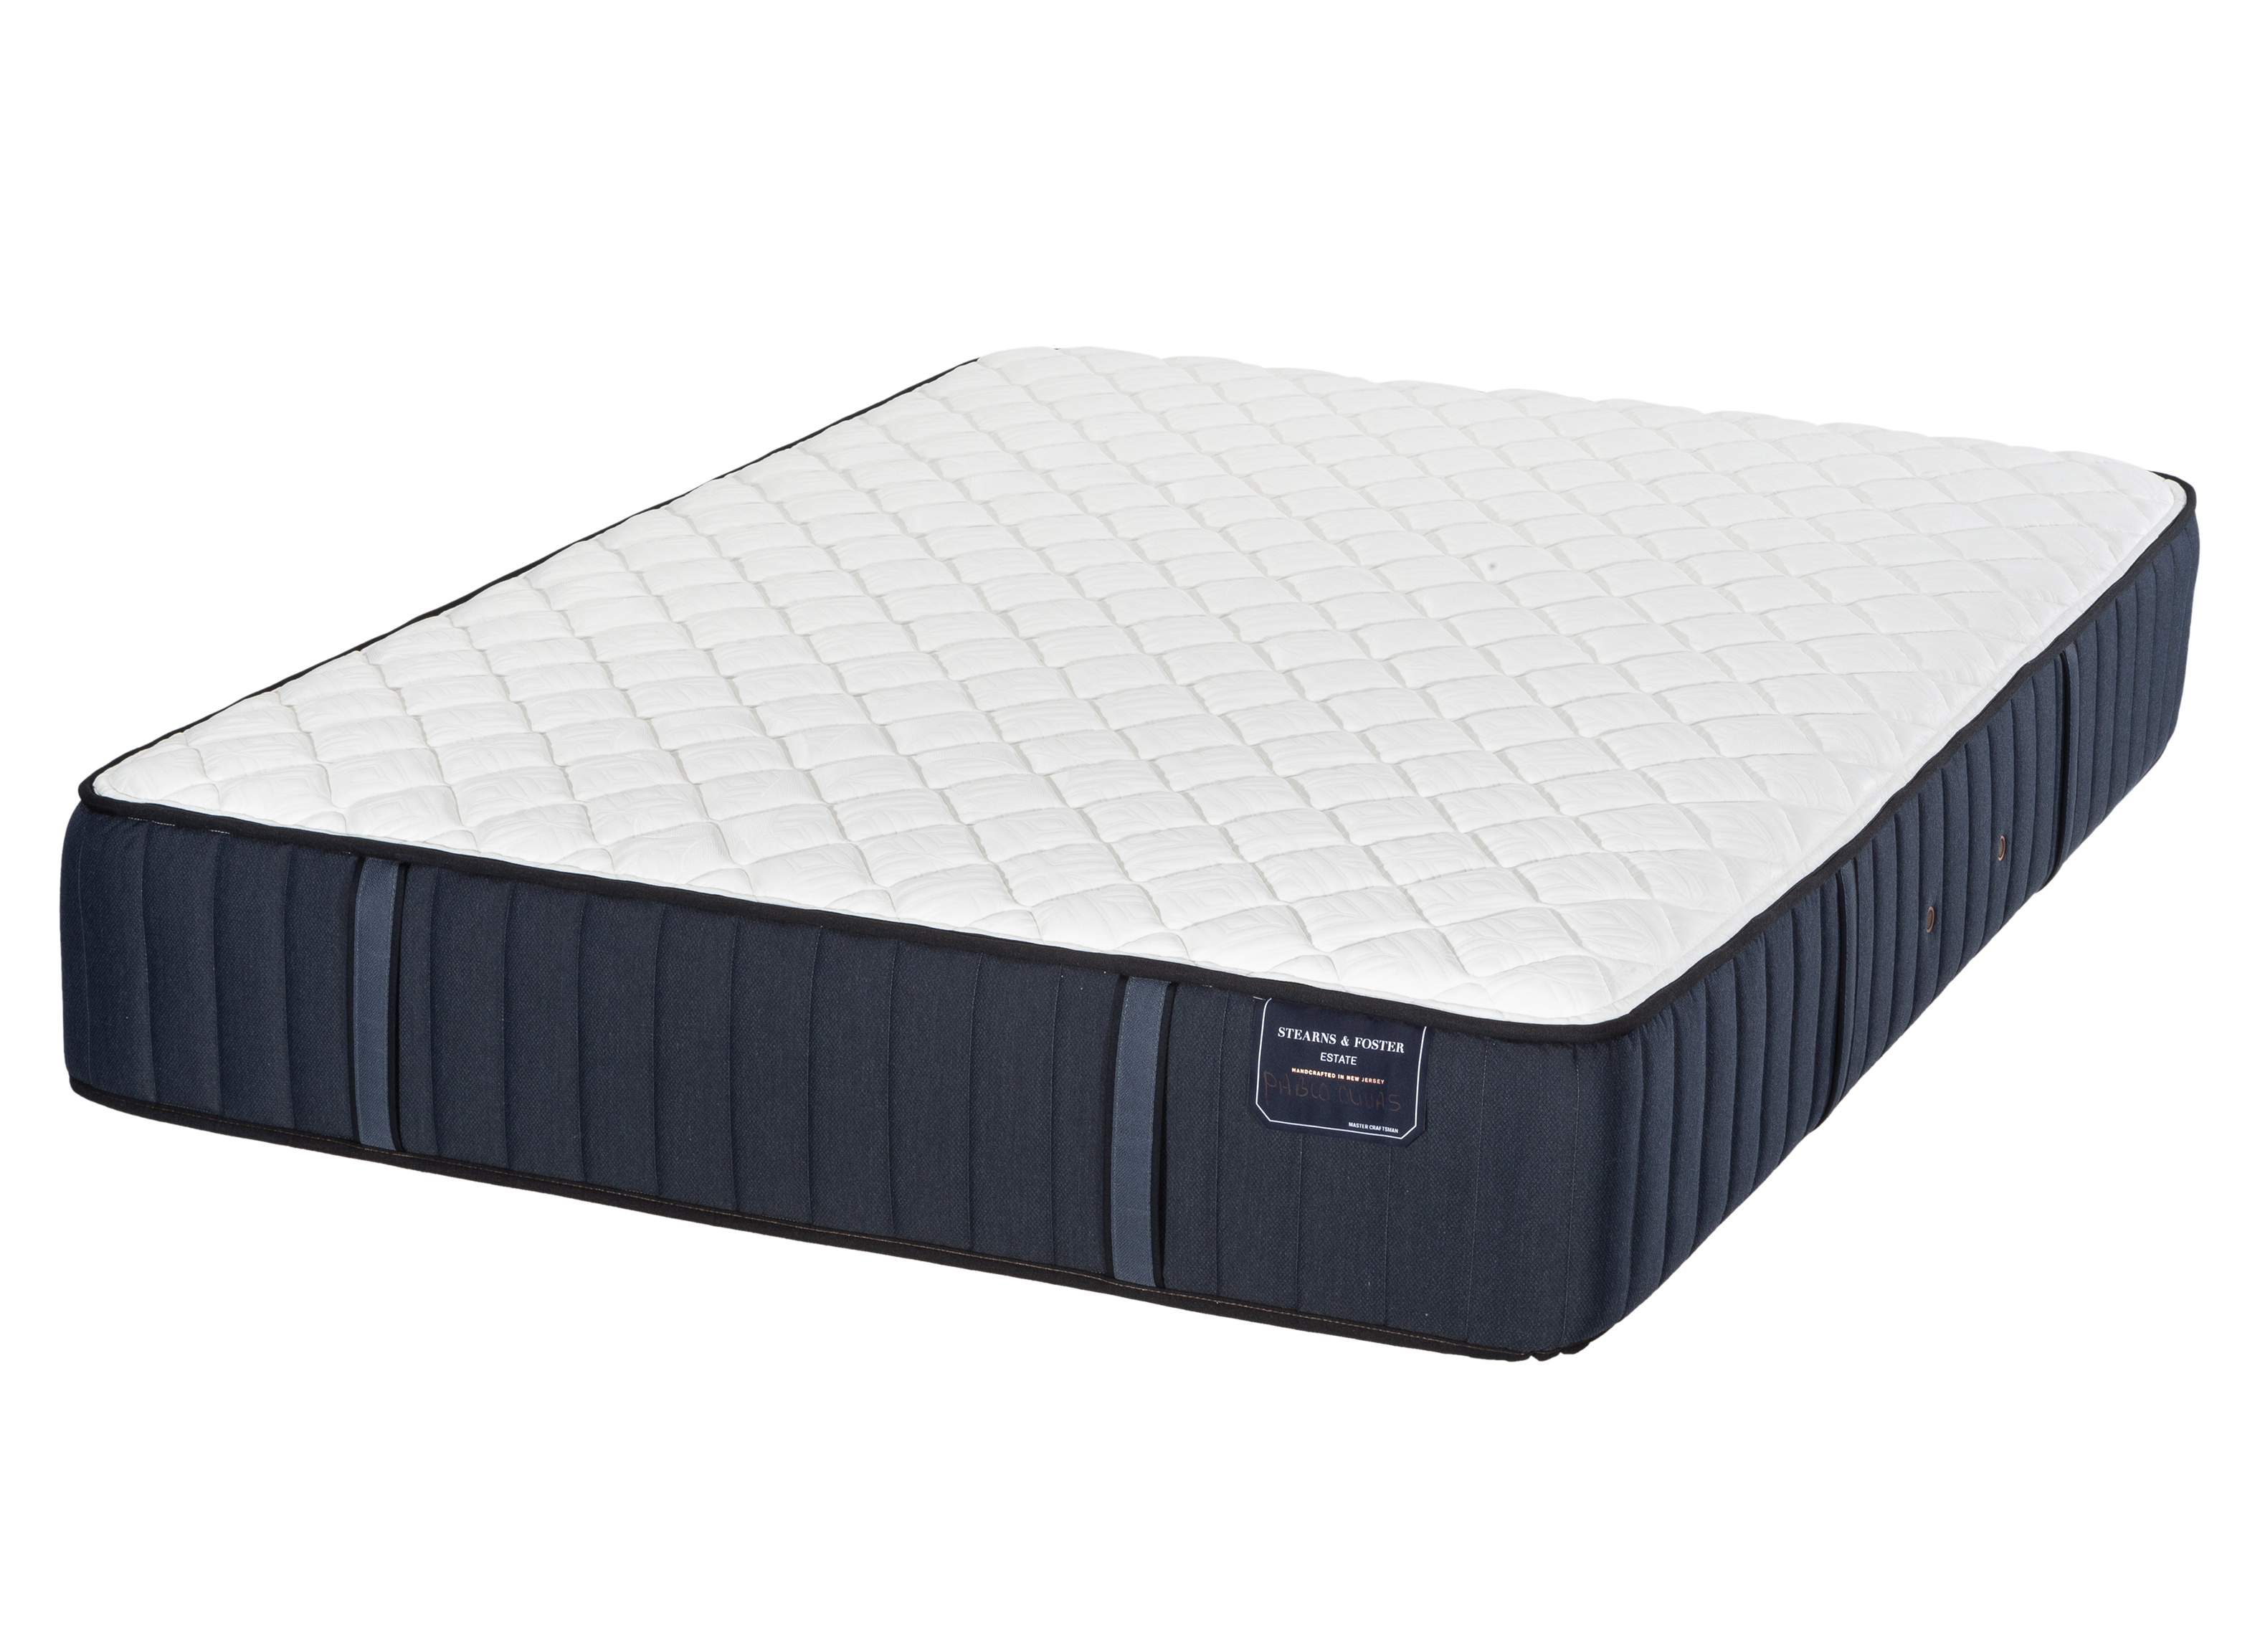 Stearns & Foster Estate Rockwell Luxury Ultra Firm 13.5 Inch Mattress  Review - Consumer Reports